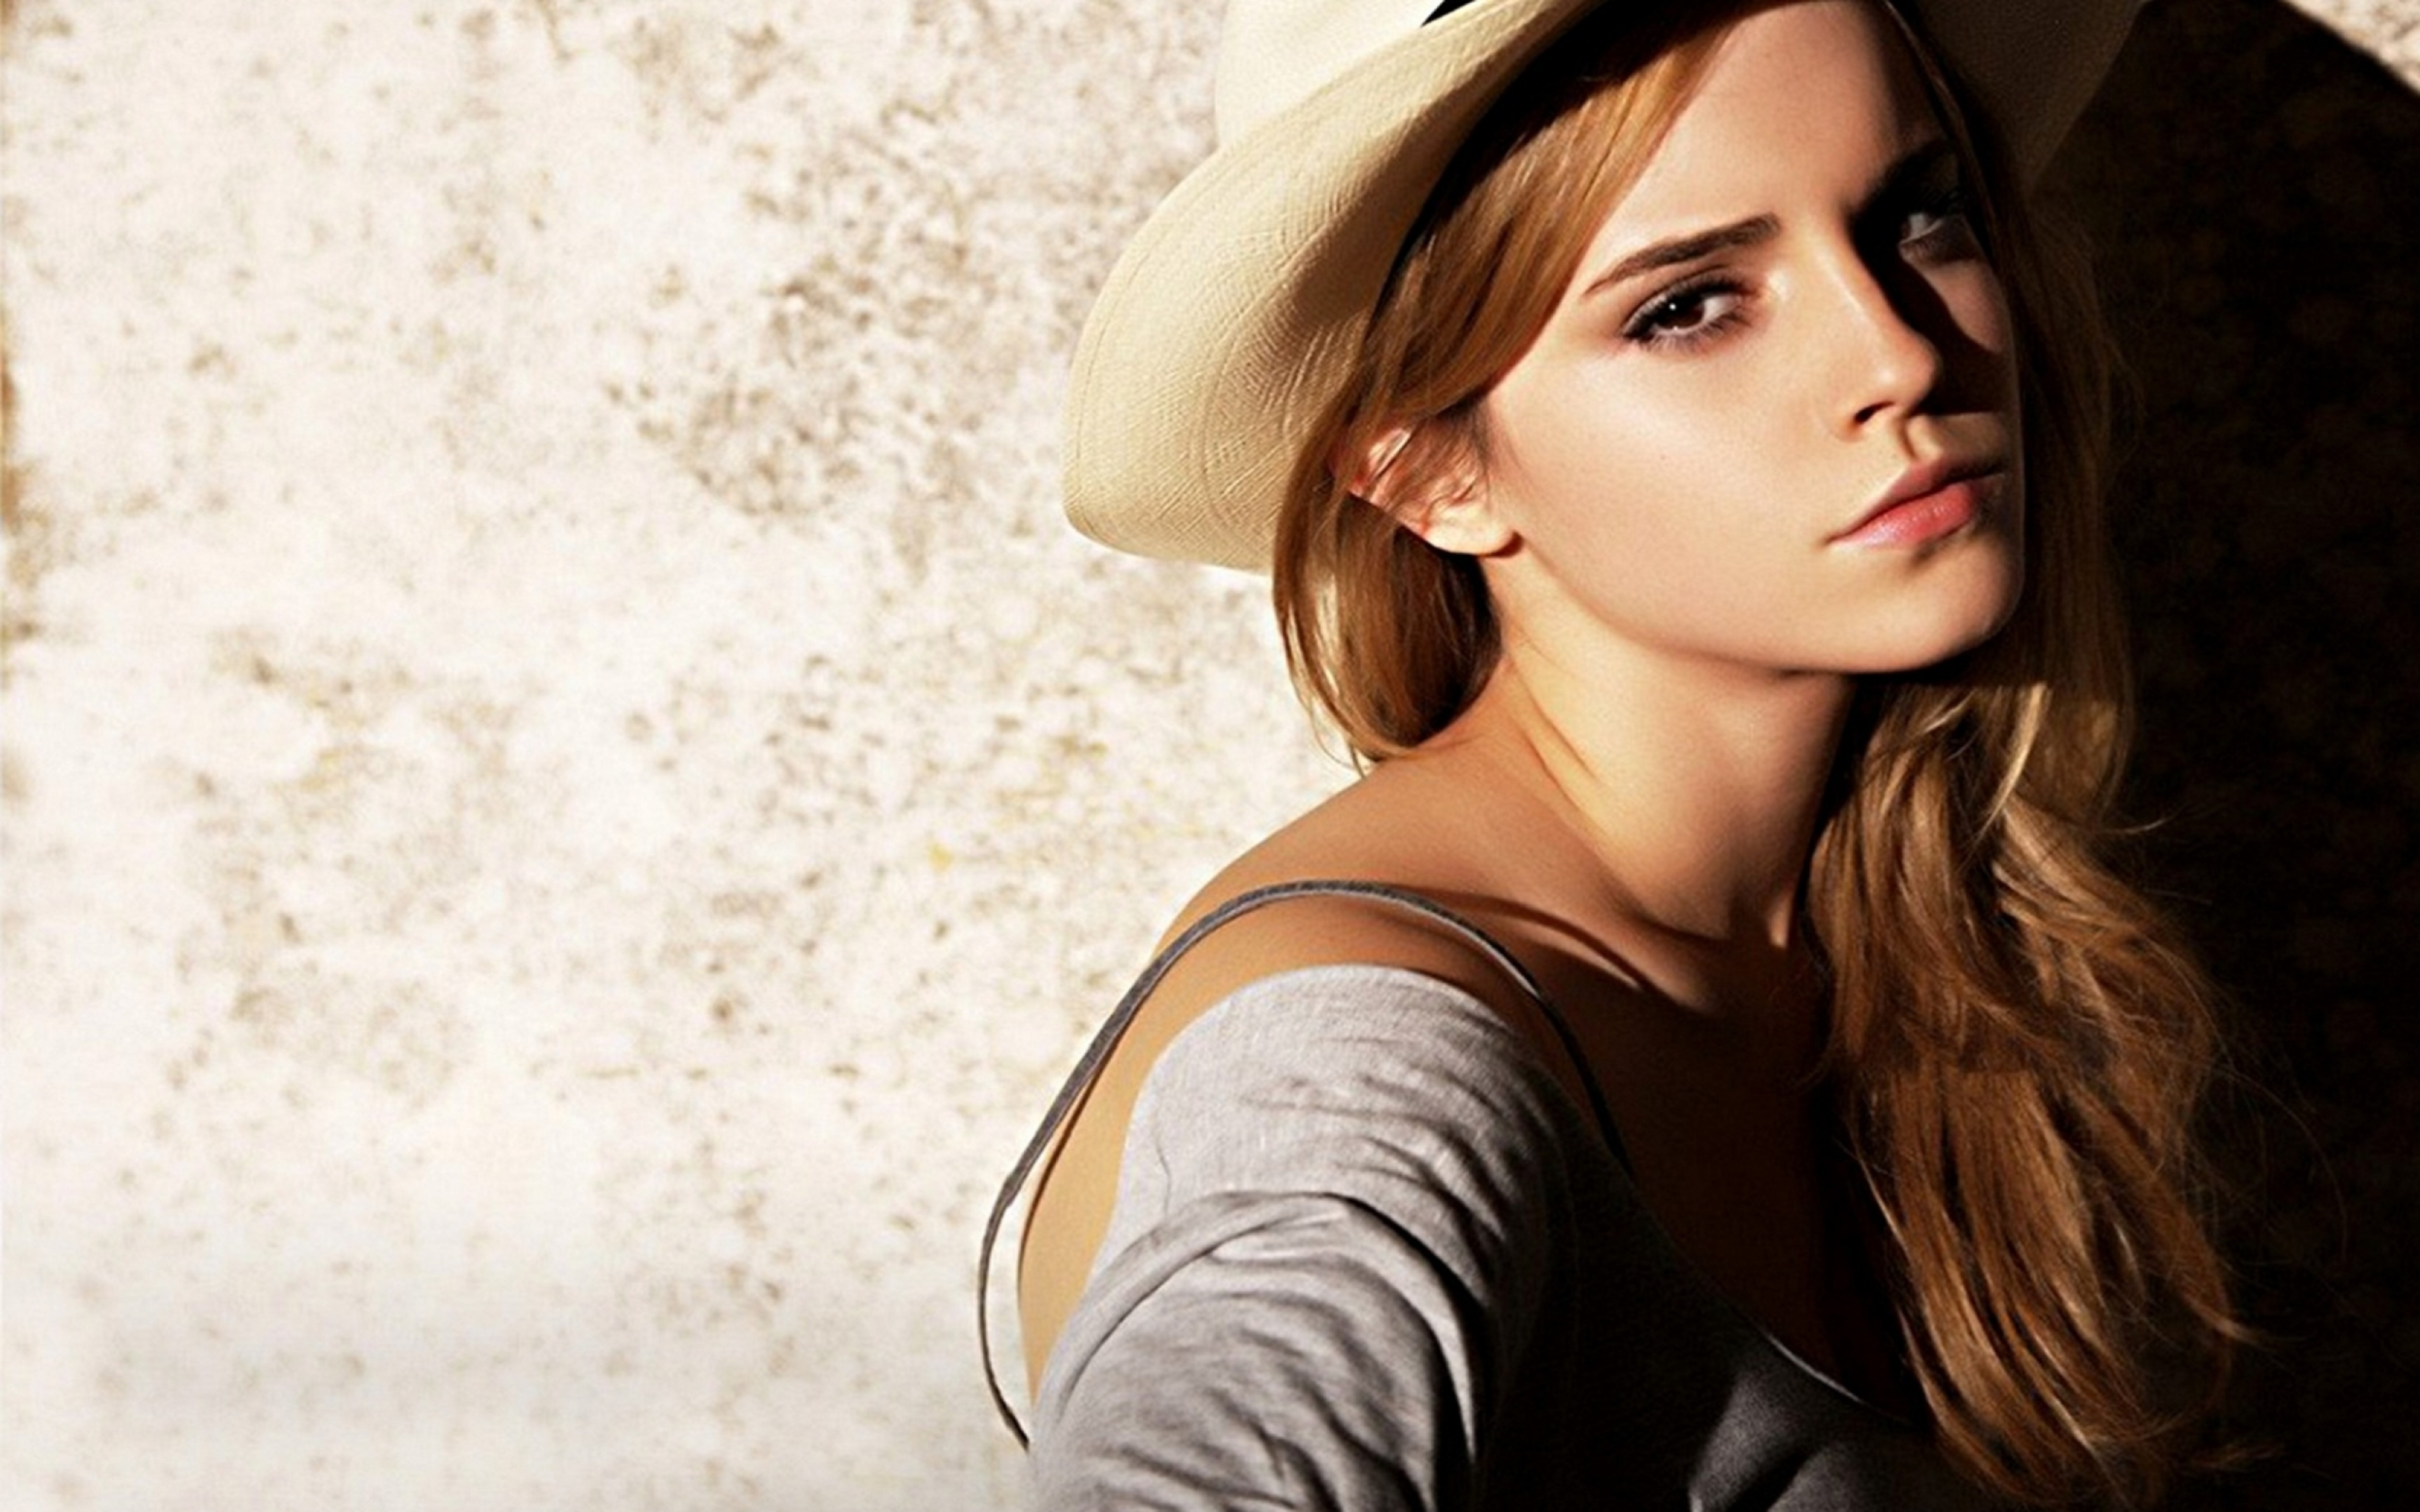 10 New Emma Watson Wallpapers 1920X1080 FULL HD 1080p For ...